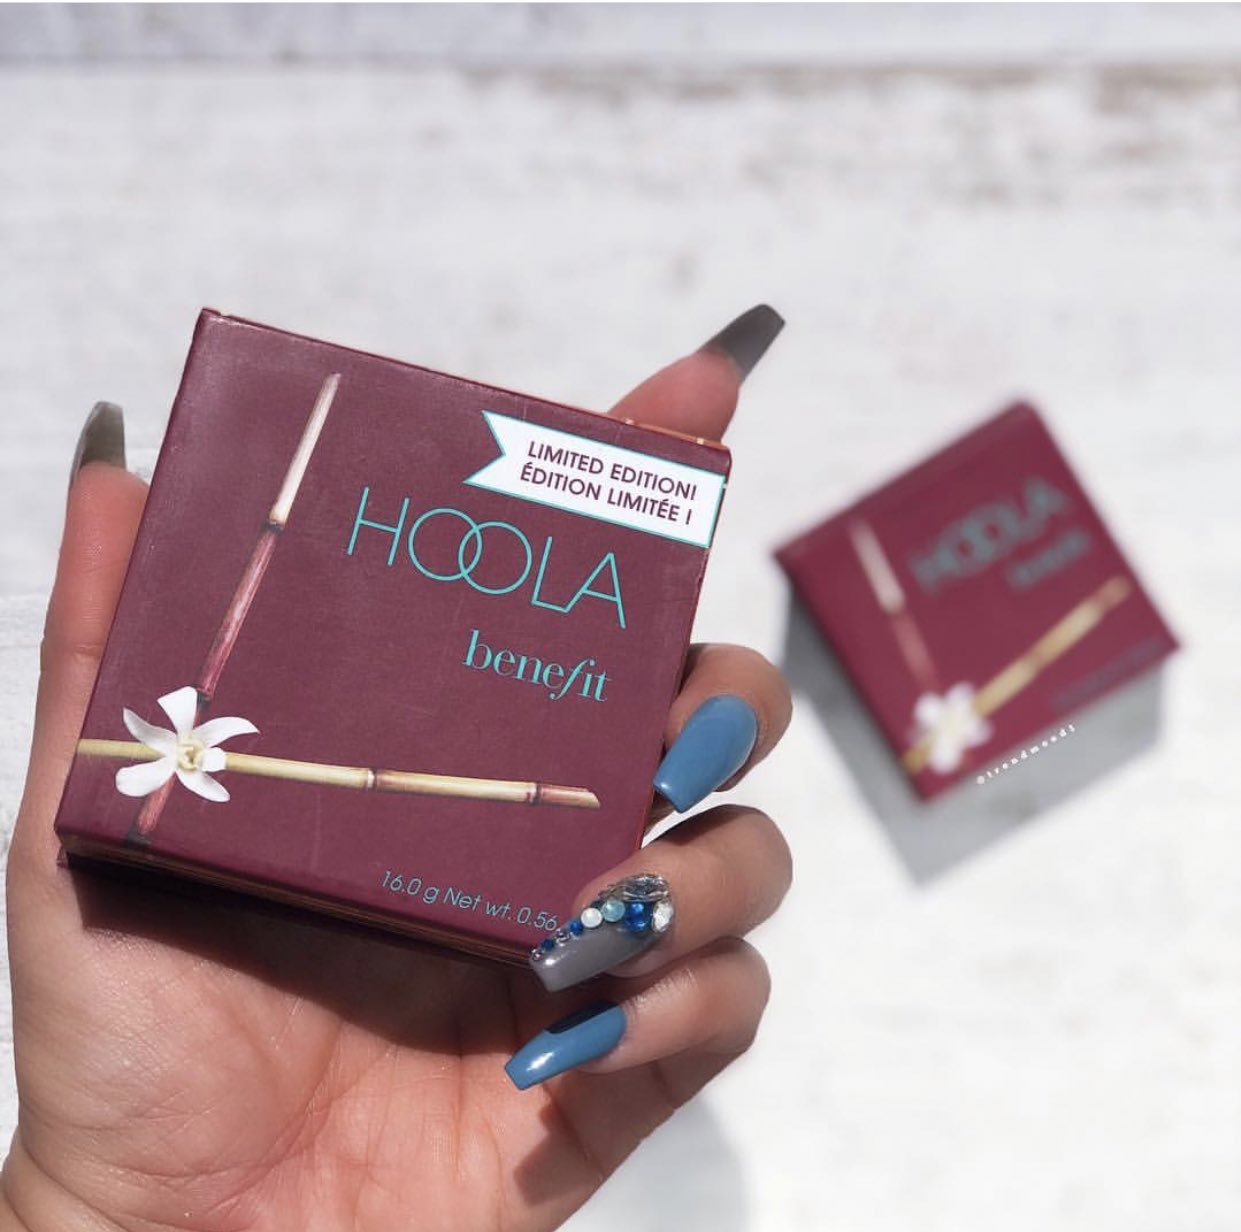 telex Tåget aflevere Trendmood on Twitter: "Available Now! 🚨LINK ➡️ https://t.co/vPCa05qXBW  online @sephora 💛☀️ NEW! Size for our favorite #HOOLA #Bronzer (matte)  Jumbo!!! By @BenefitBeauty 😍 for a a natural-looking tan, in a bigger  compact